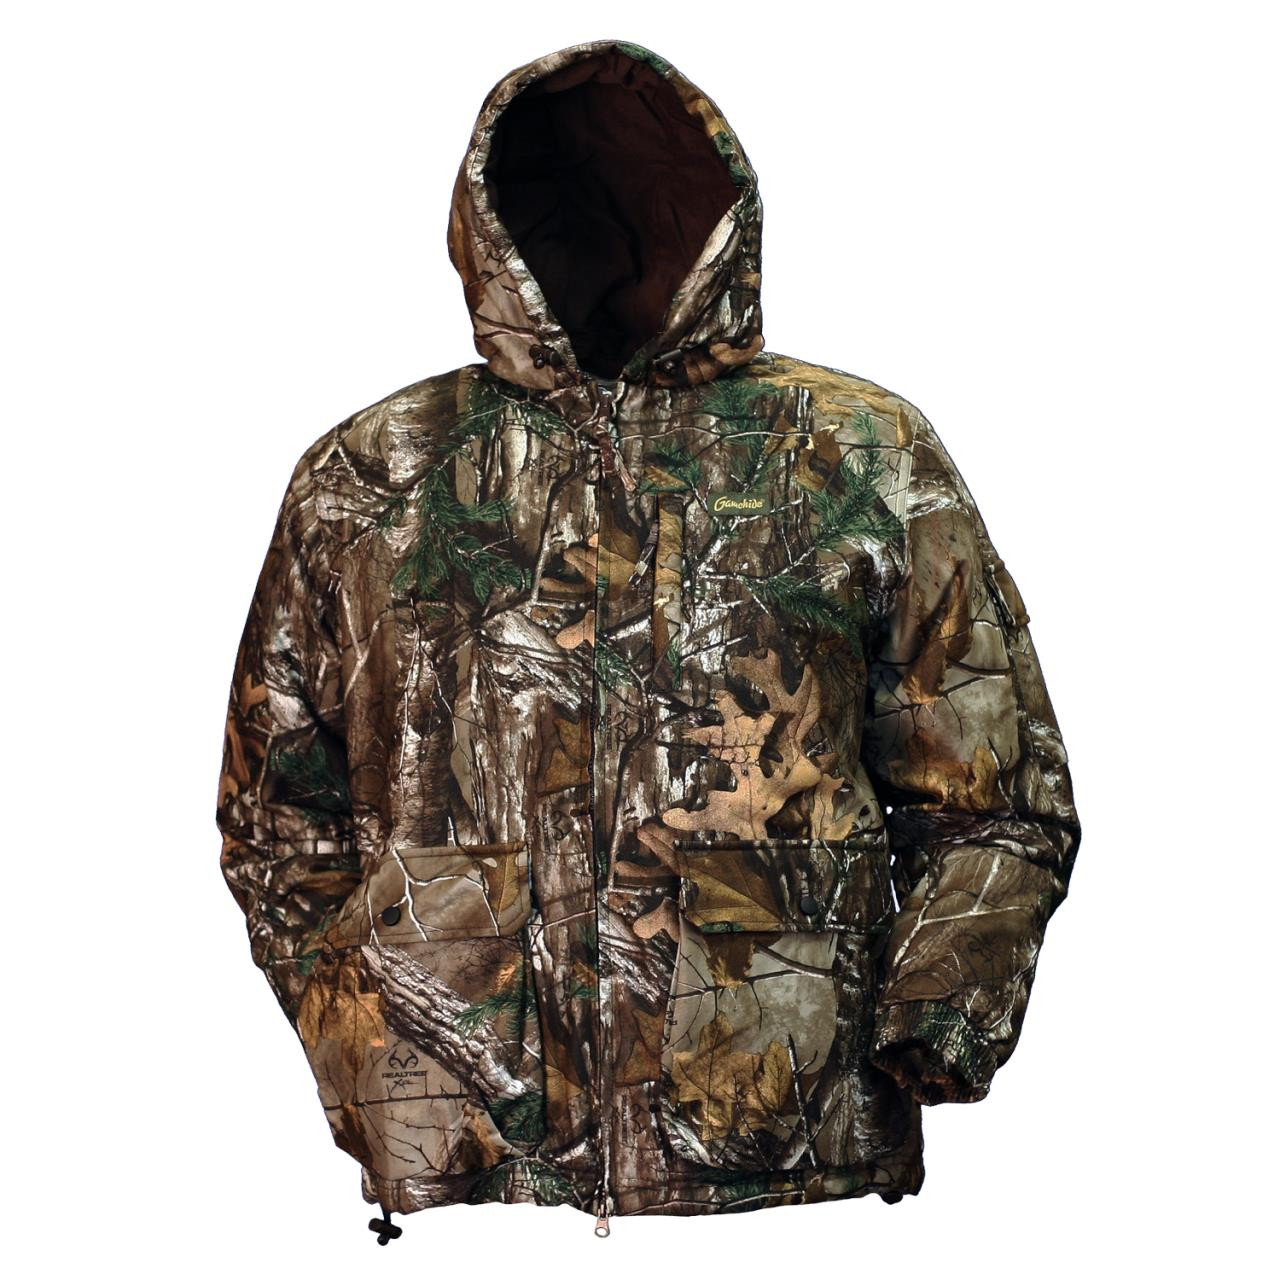 Gamehide Hunting Tundra Youth Jacket - Presleys Outdoors